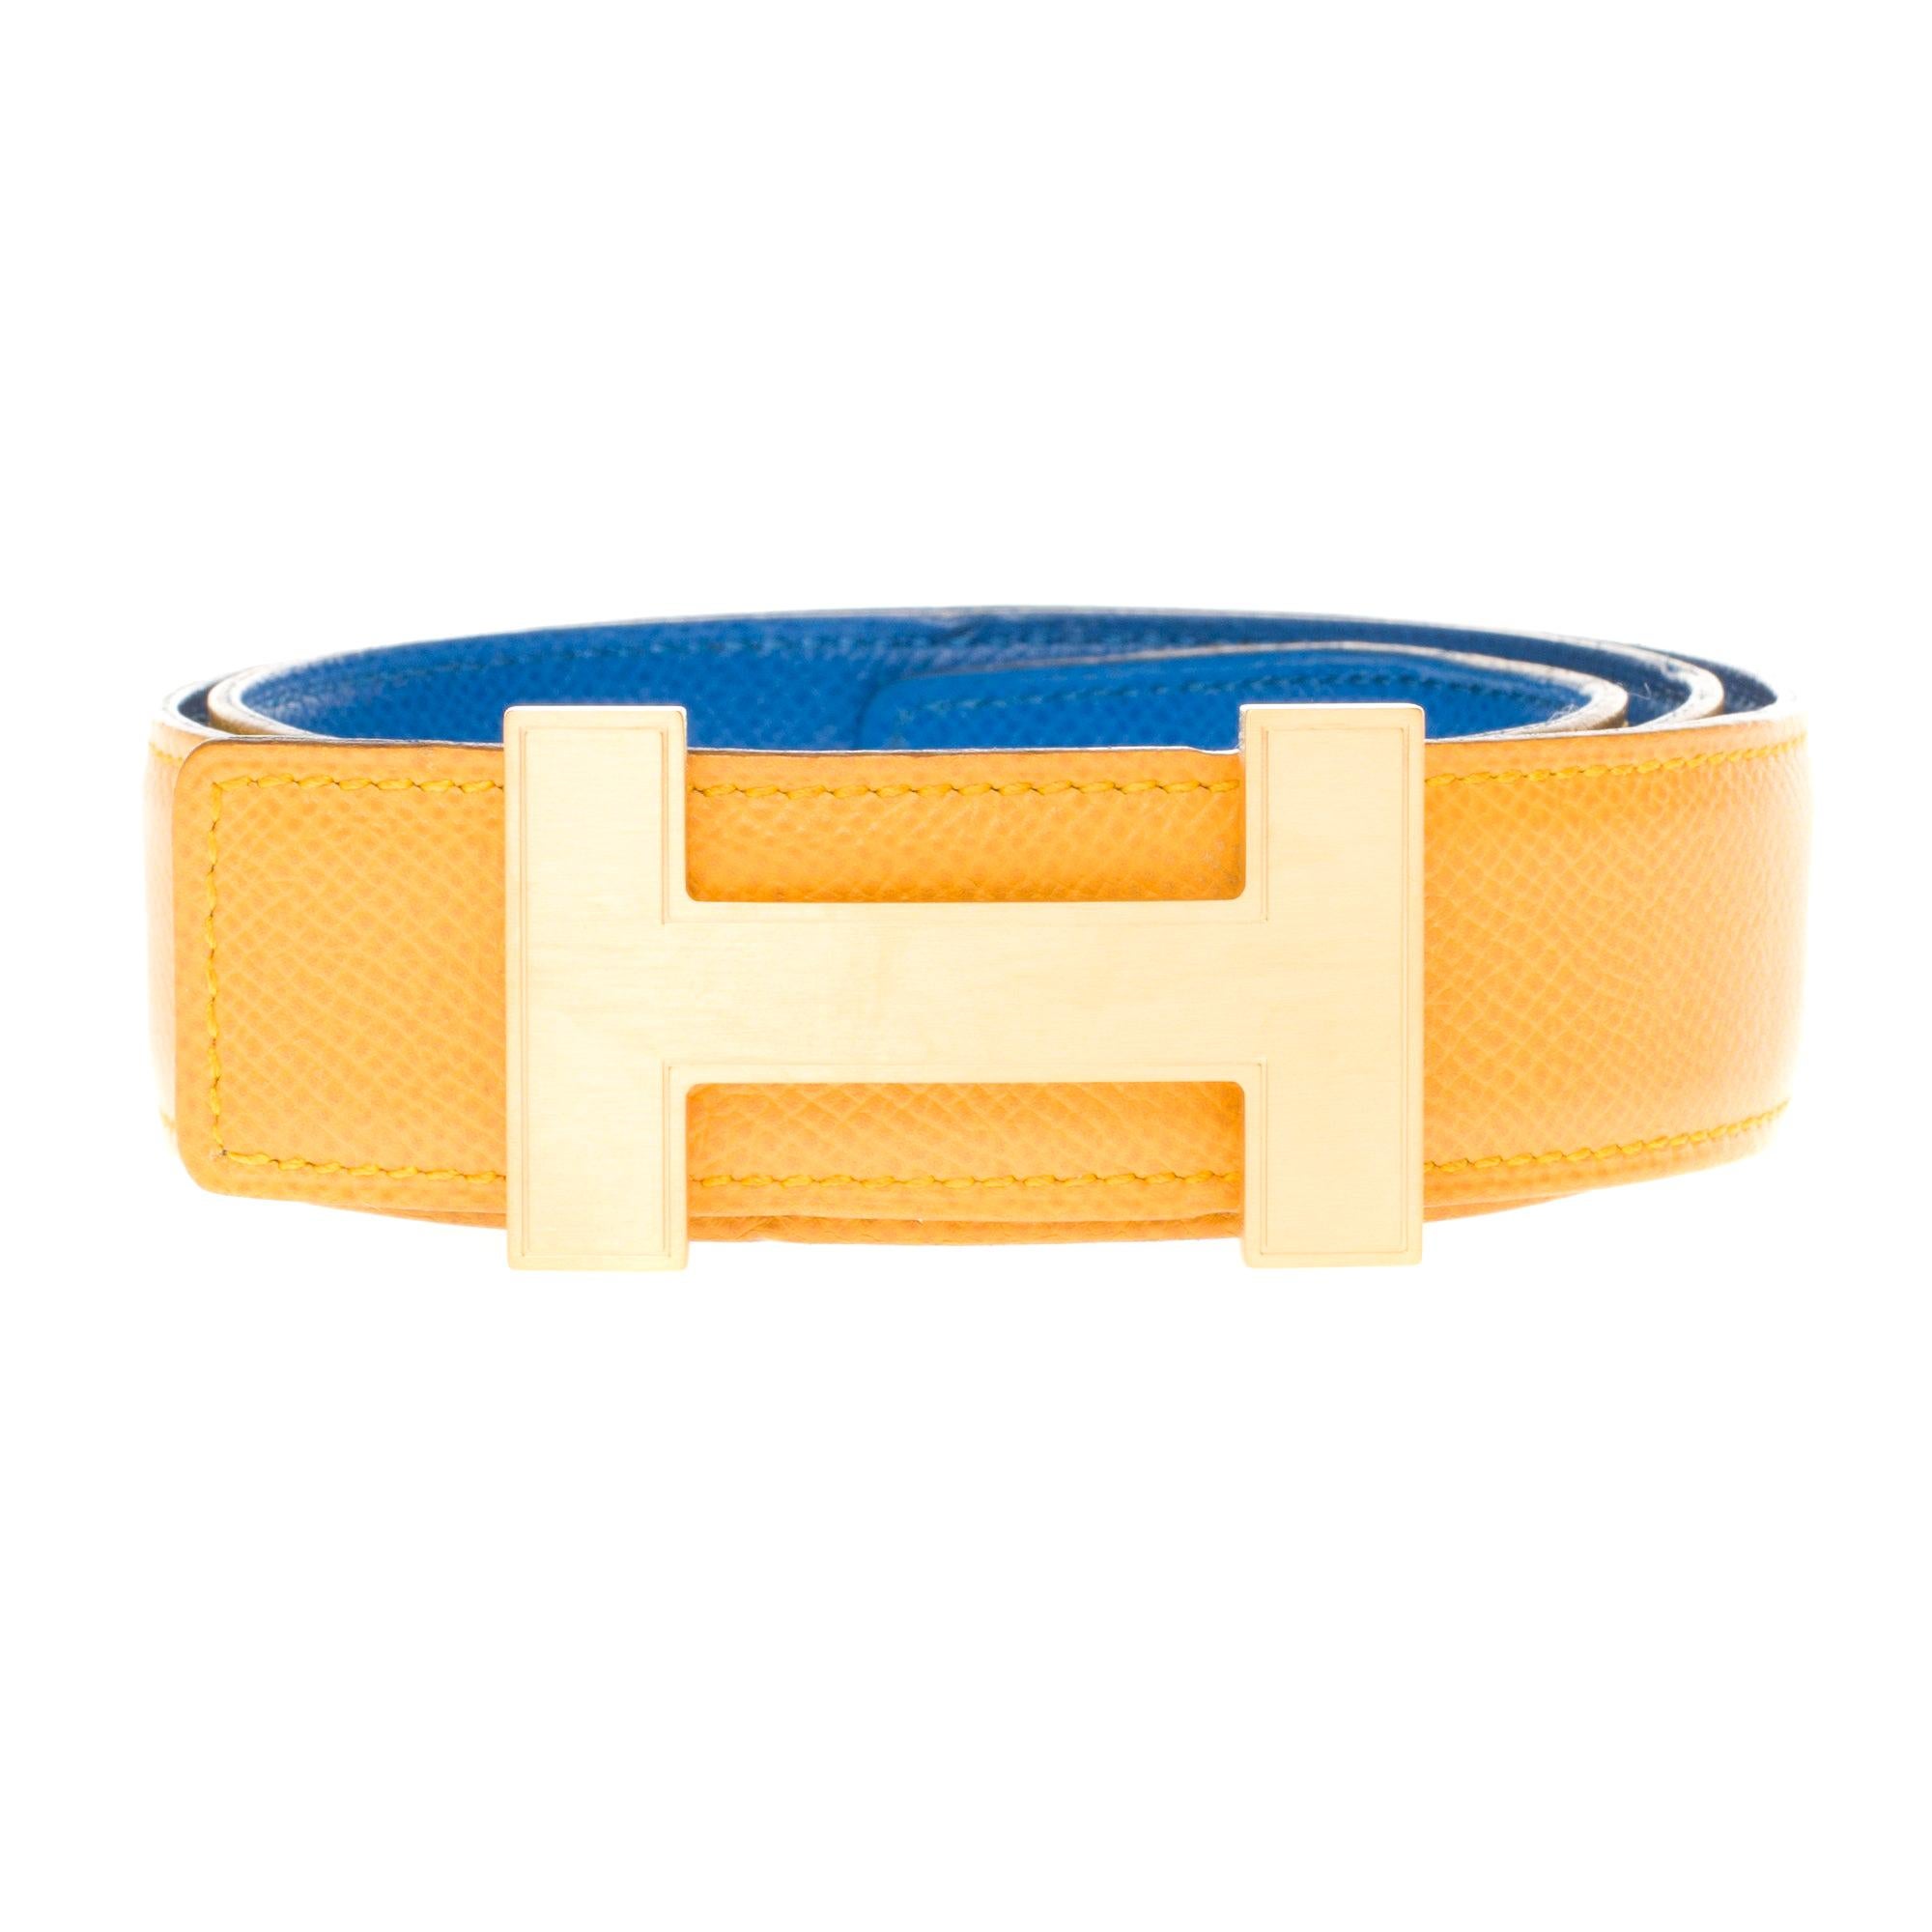 Hermès Constance reversible belt in Yellow and blue epsom leather ...